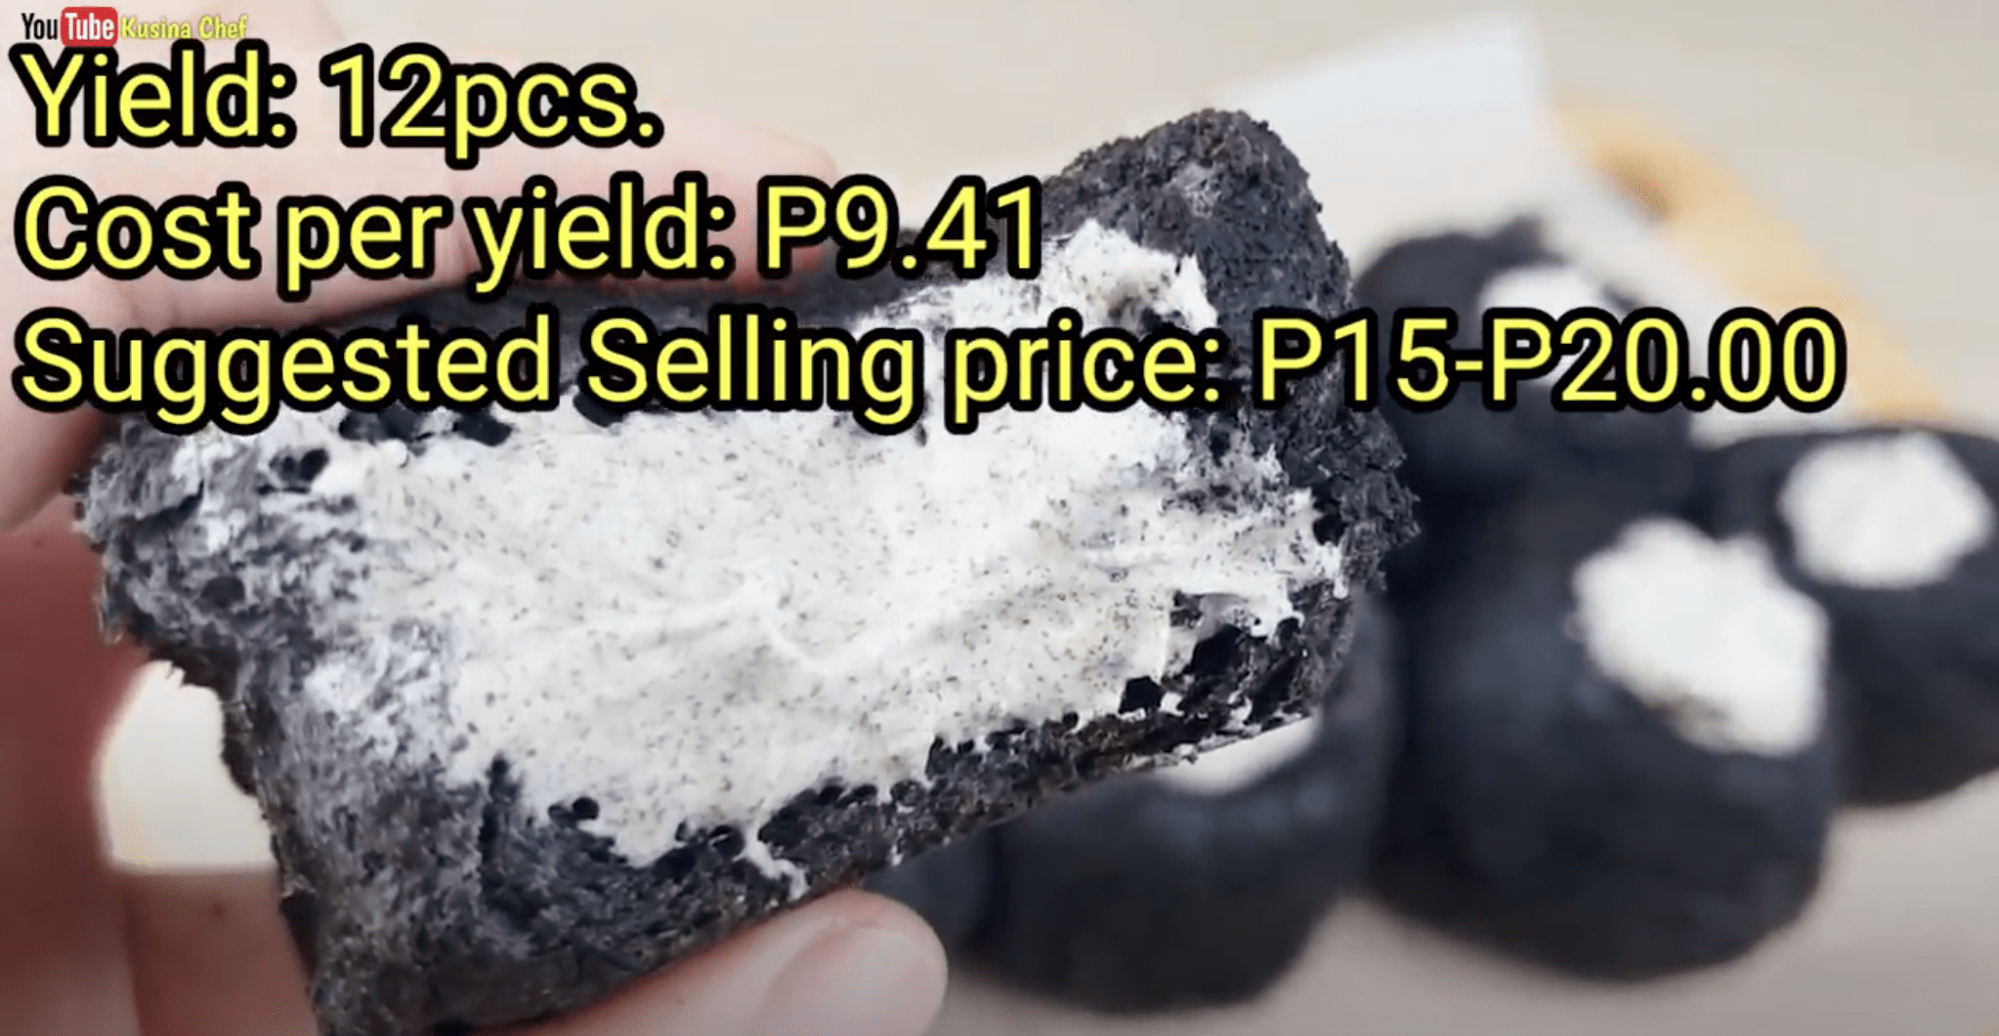 oreo pandesal - yield, cost, and srp